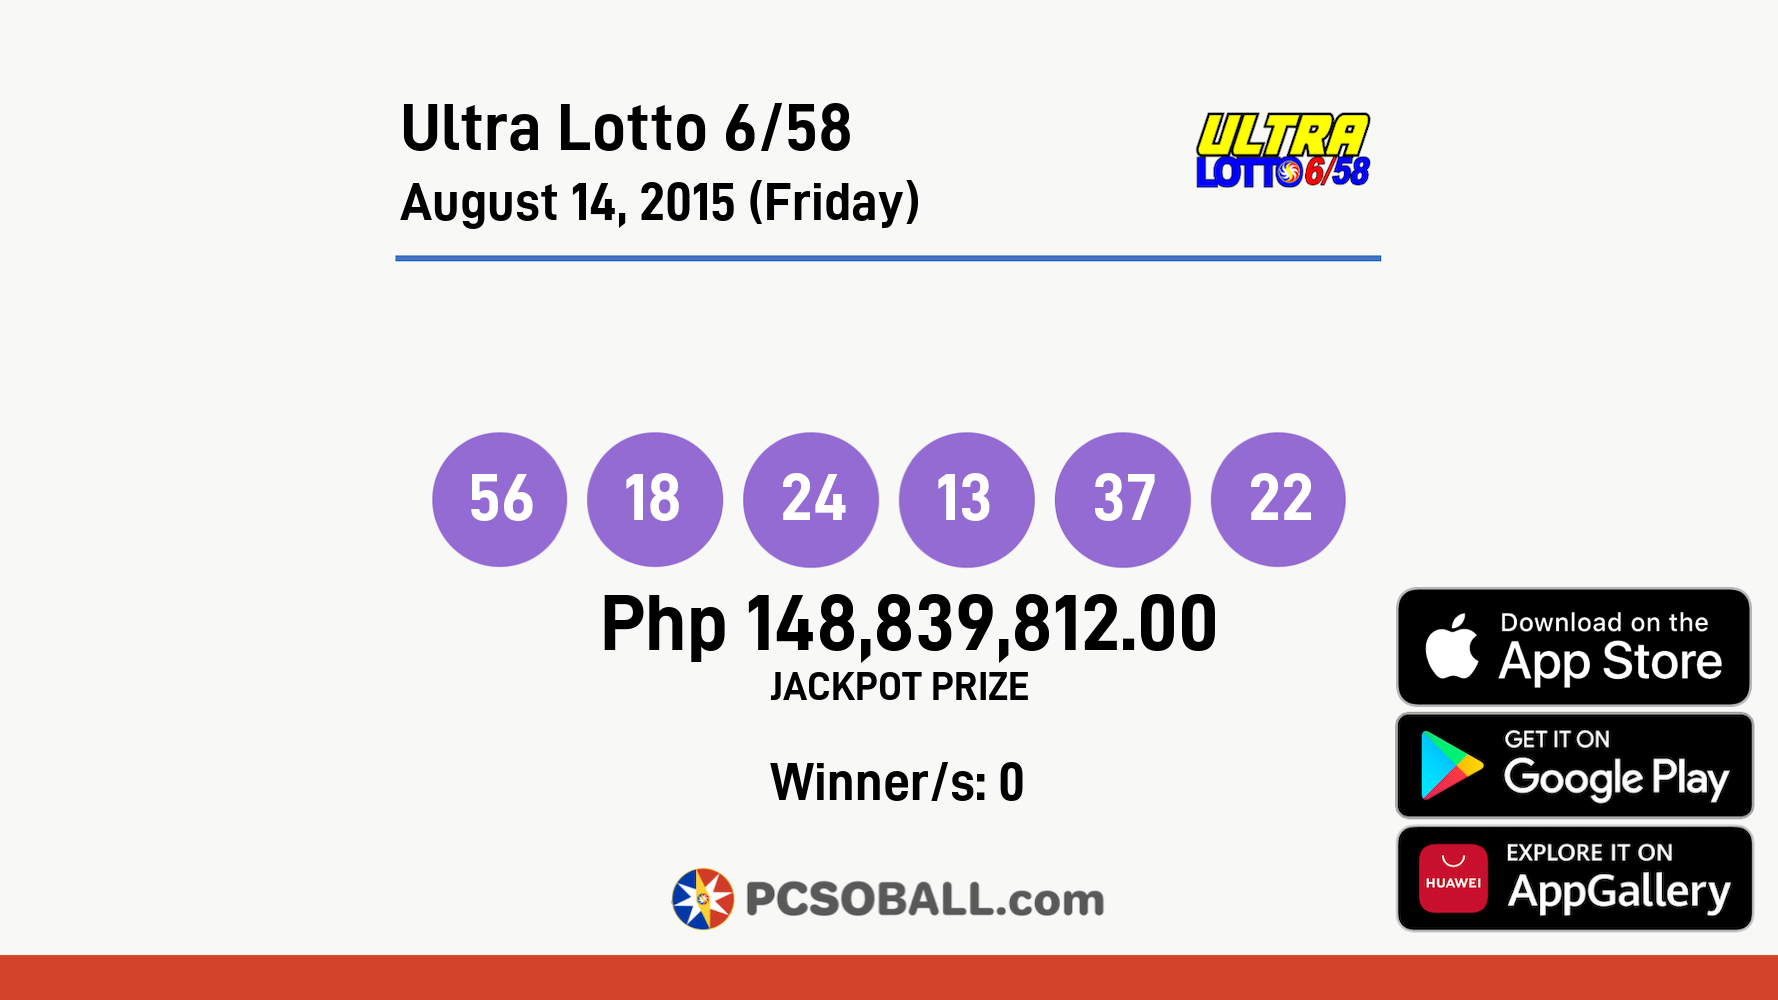 Ultra Lotto 6/58 August 14, 2015 (Friday) Result